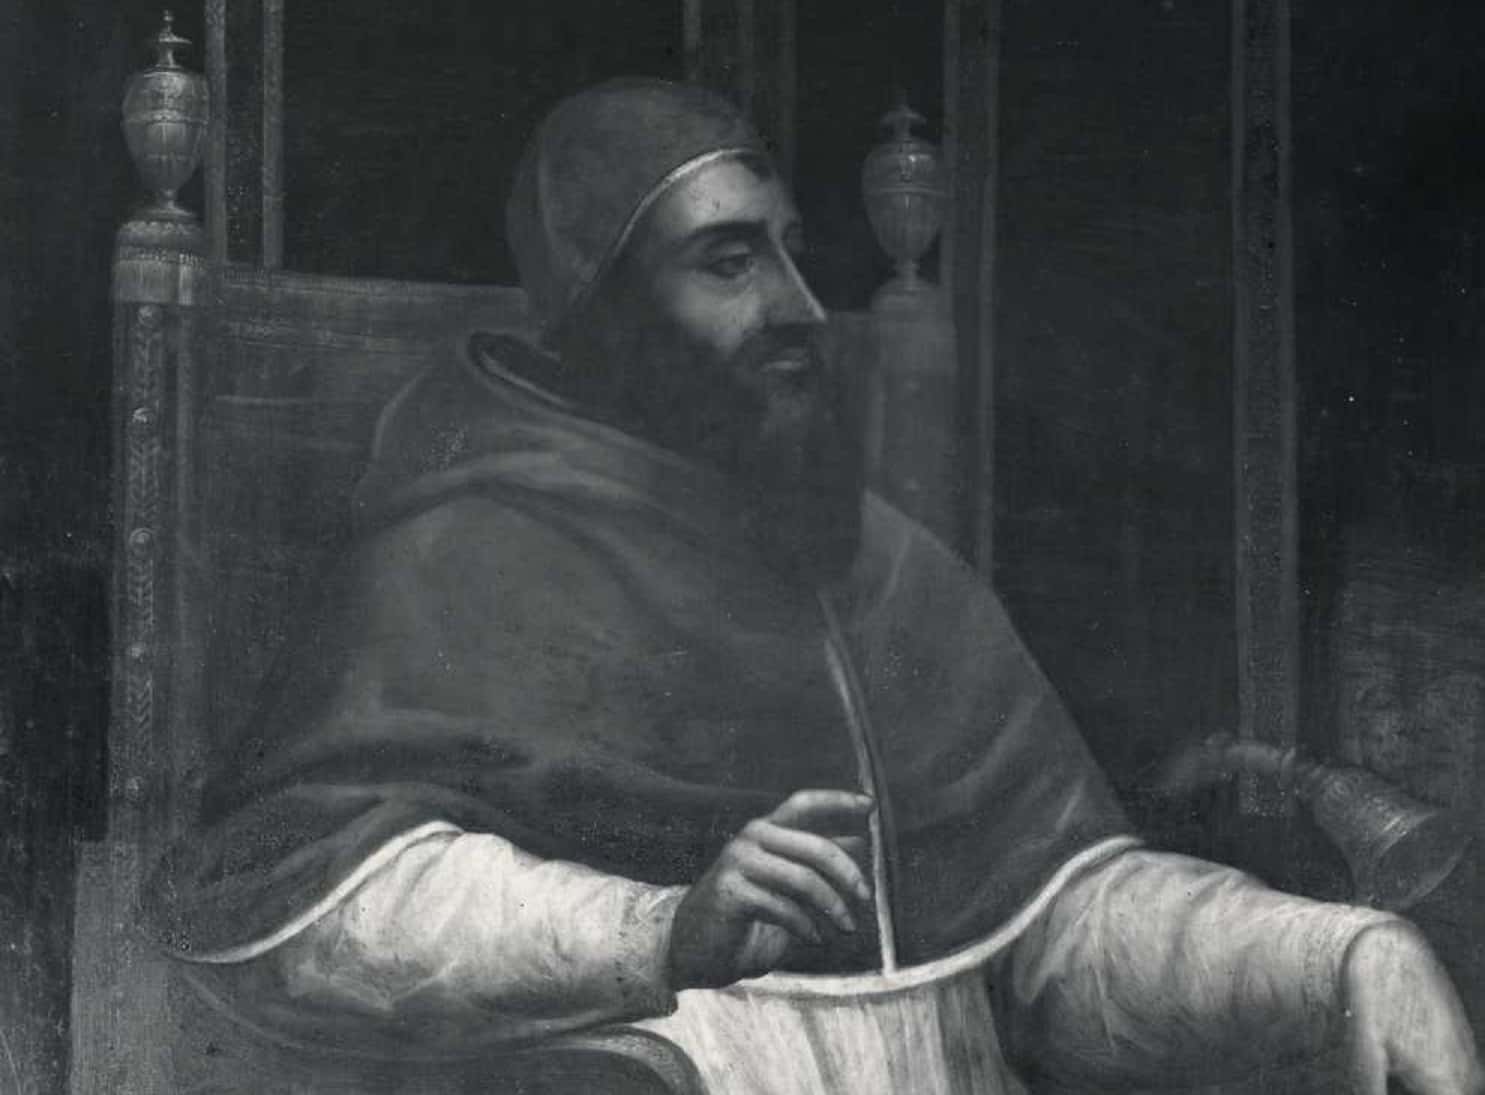 Pope Clement VII Facts